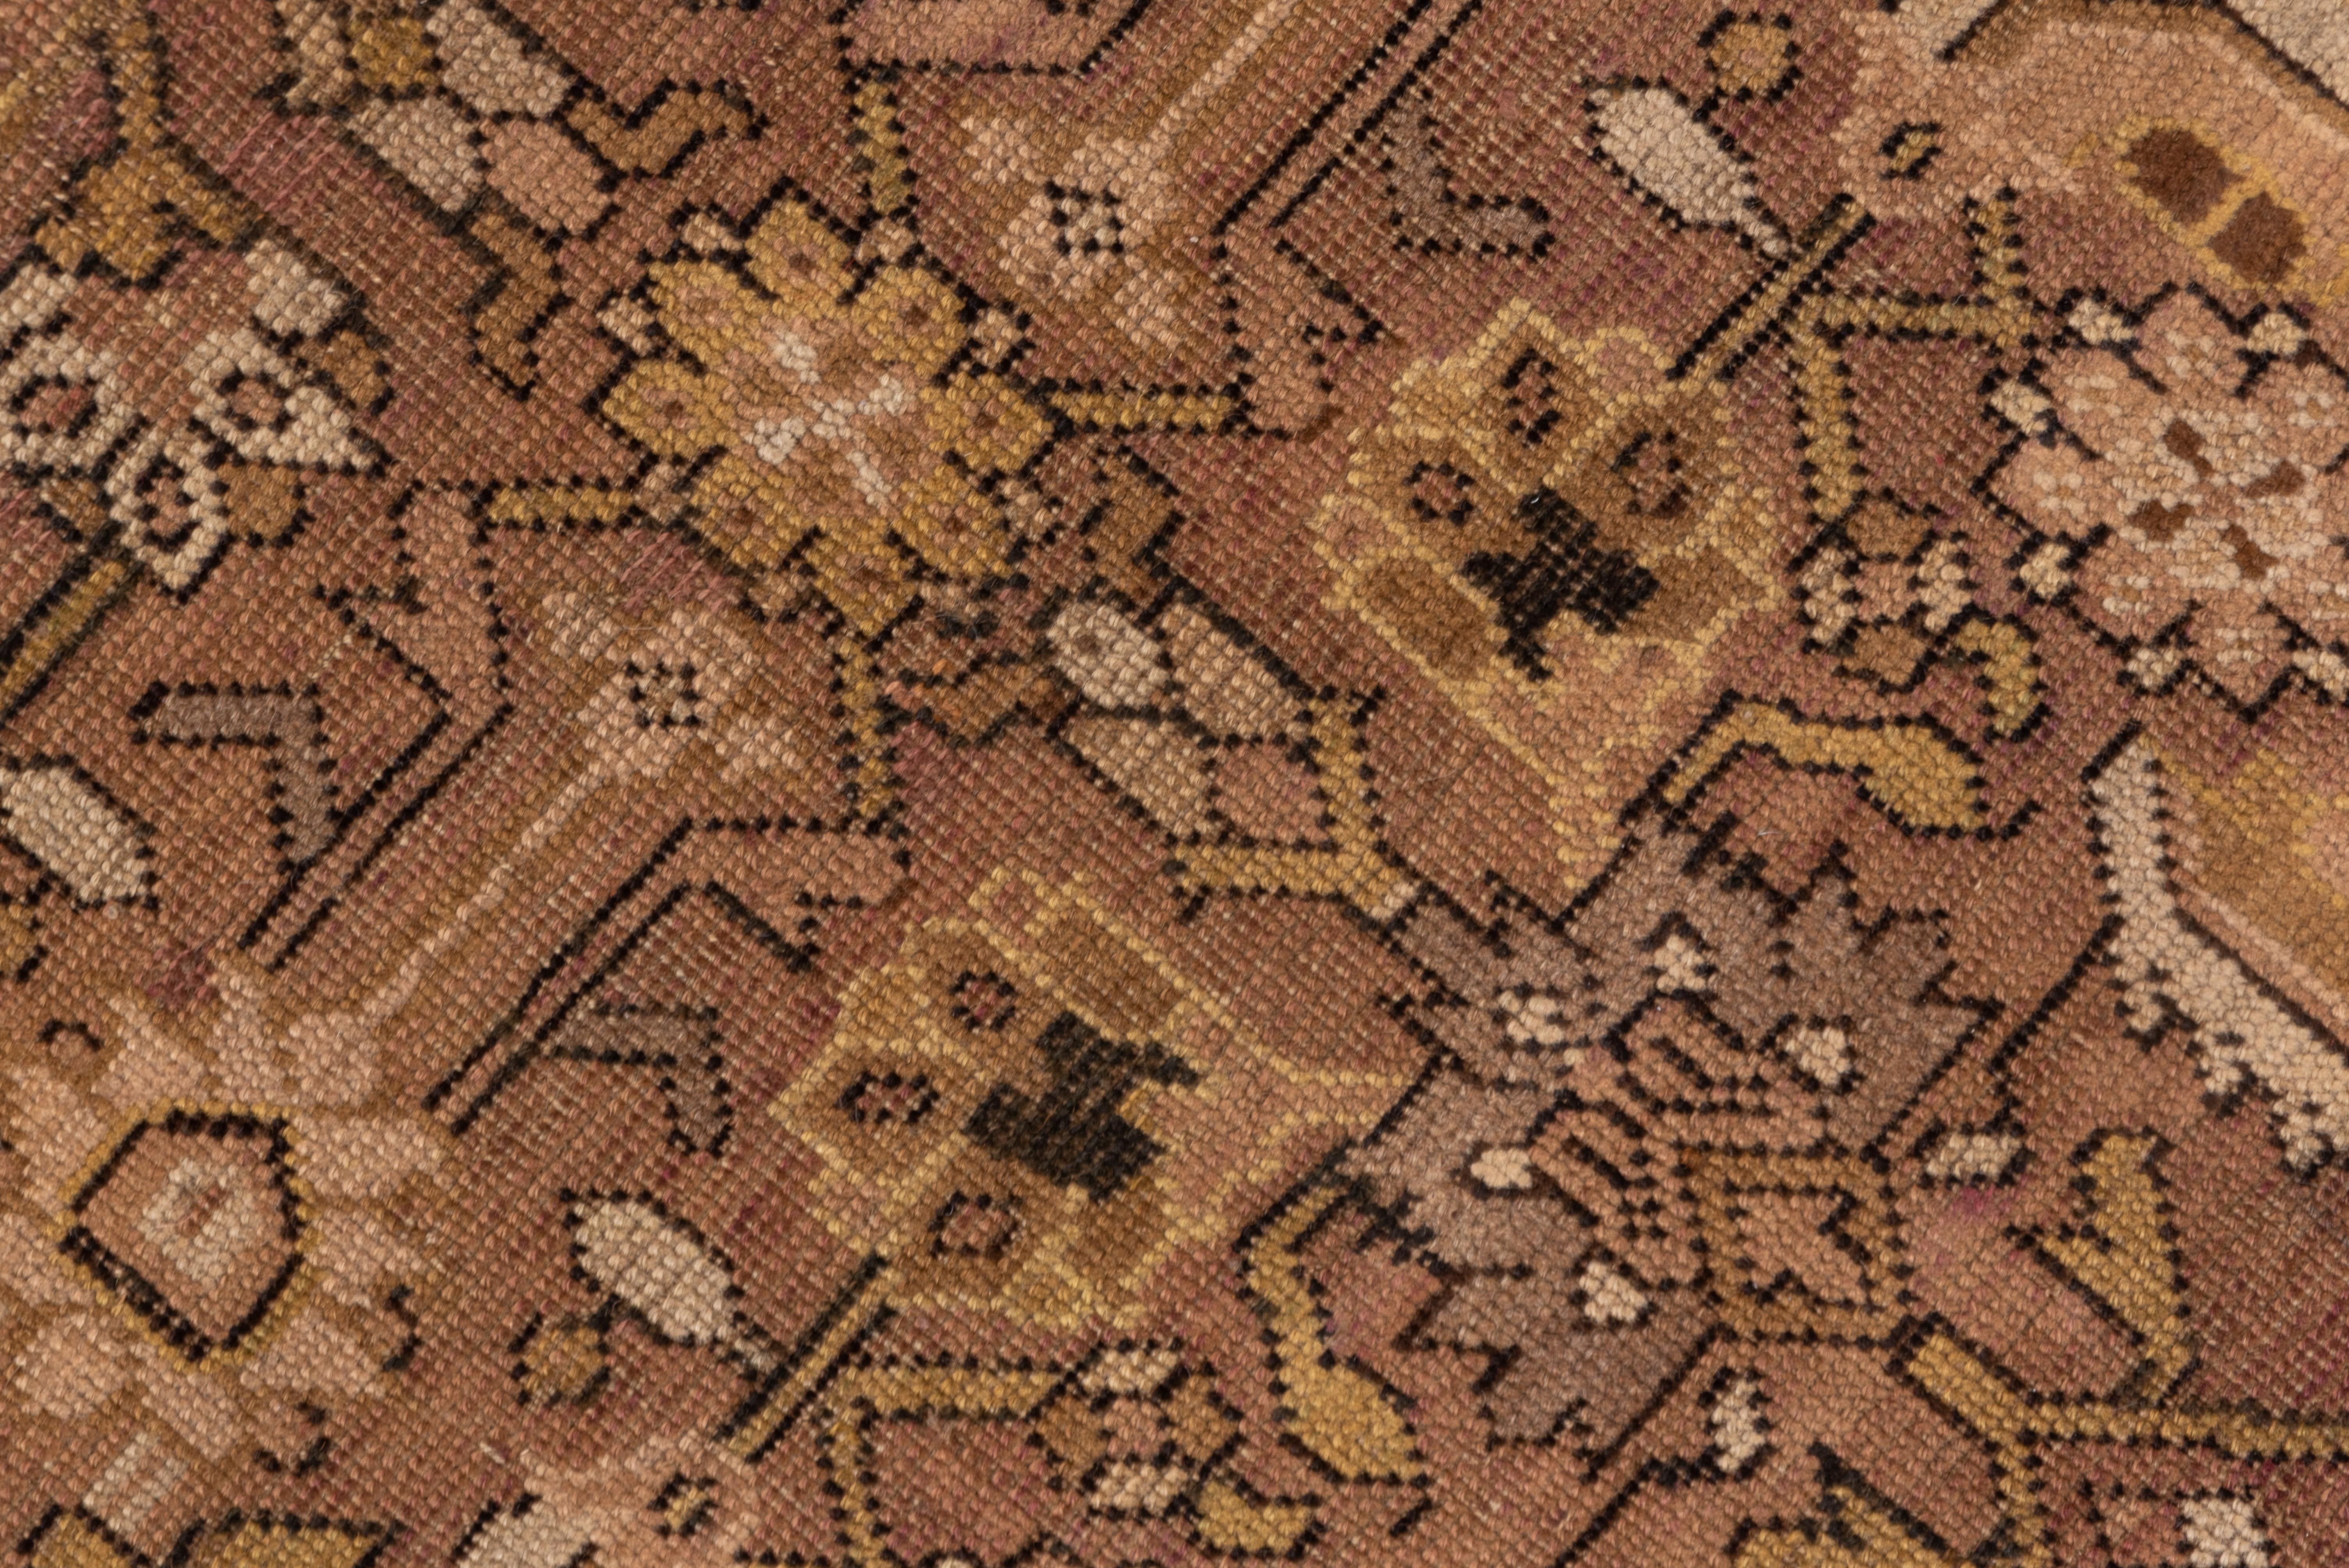 In a Persian style, this South Caucasian kellegi (long carpet) shows a Herati design with fat leaves dominating small rosettes, all on the light brown ground. Sienna brown main border with reversing, flattened reversing fan palmettes. Wool